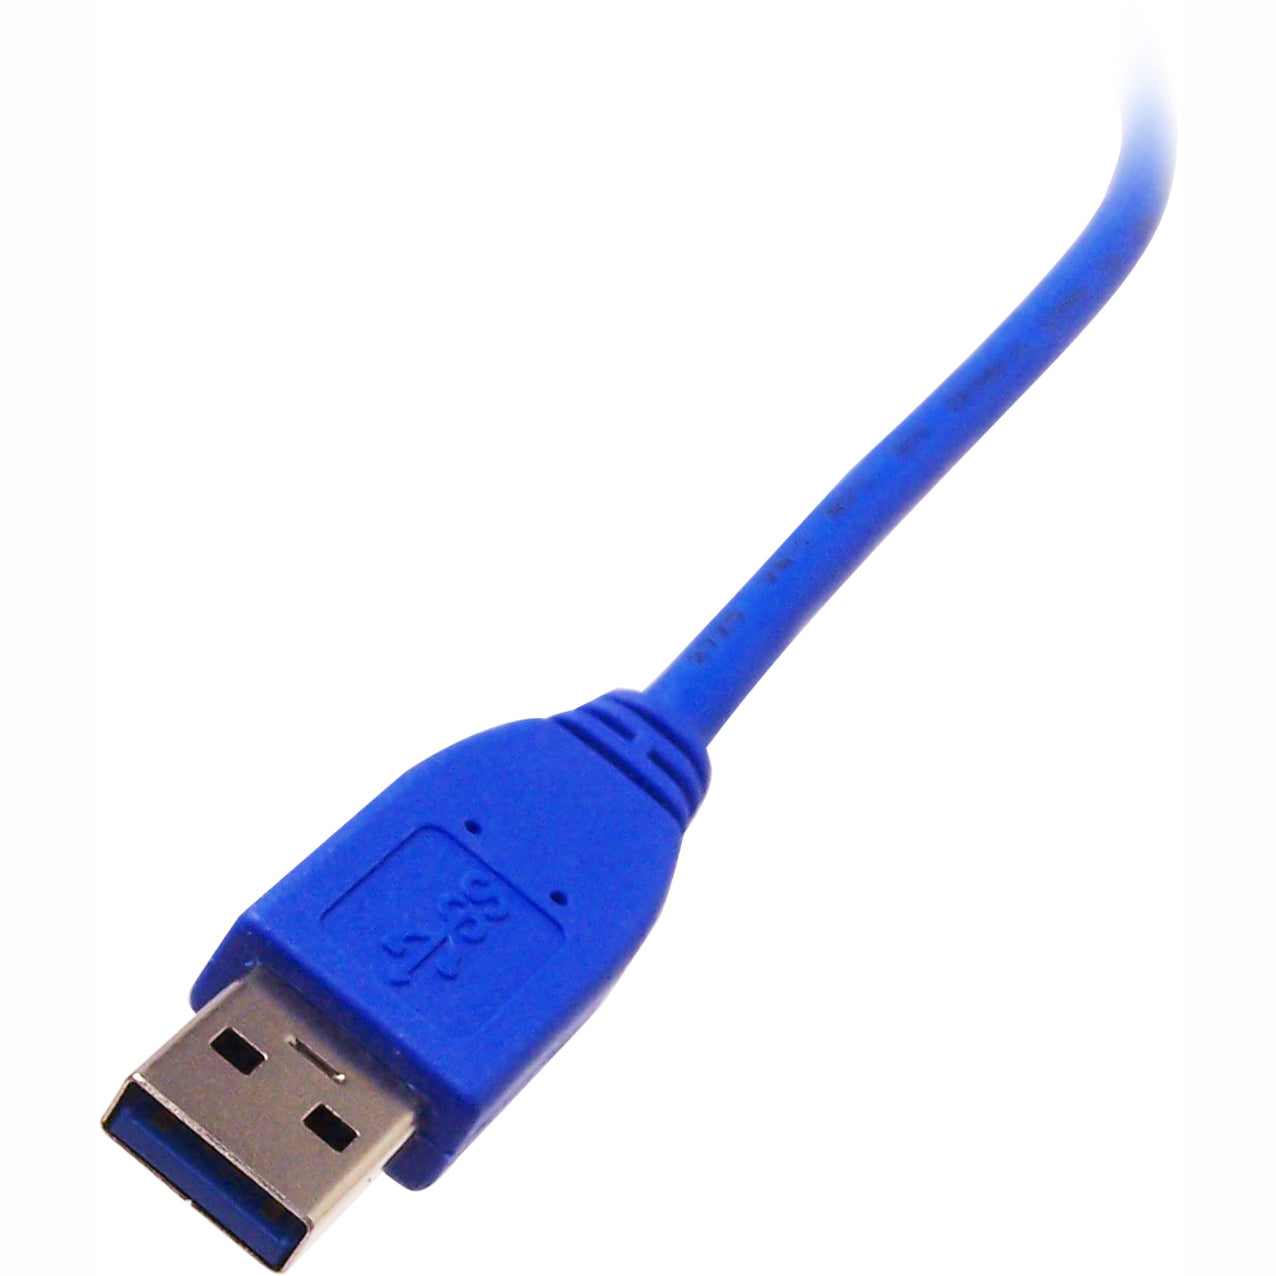 SIIG CB-US0212-S1 SuperSpeed USB 3.0 Cable, 6.56 ft, Copper Conductor, Shielded, PVC Jacket, Lifetime Warranty